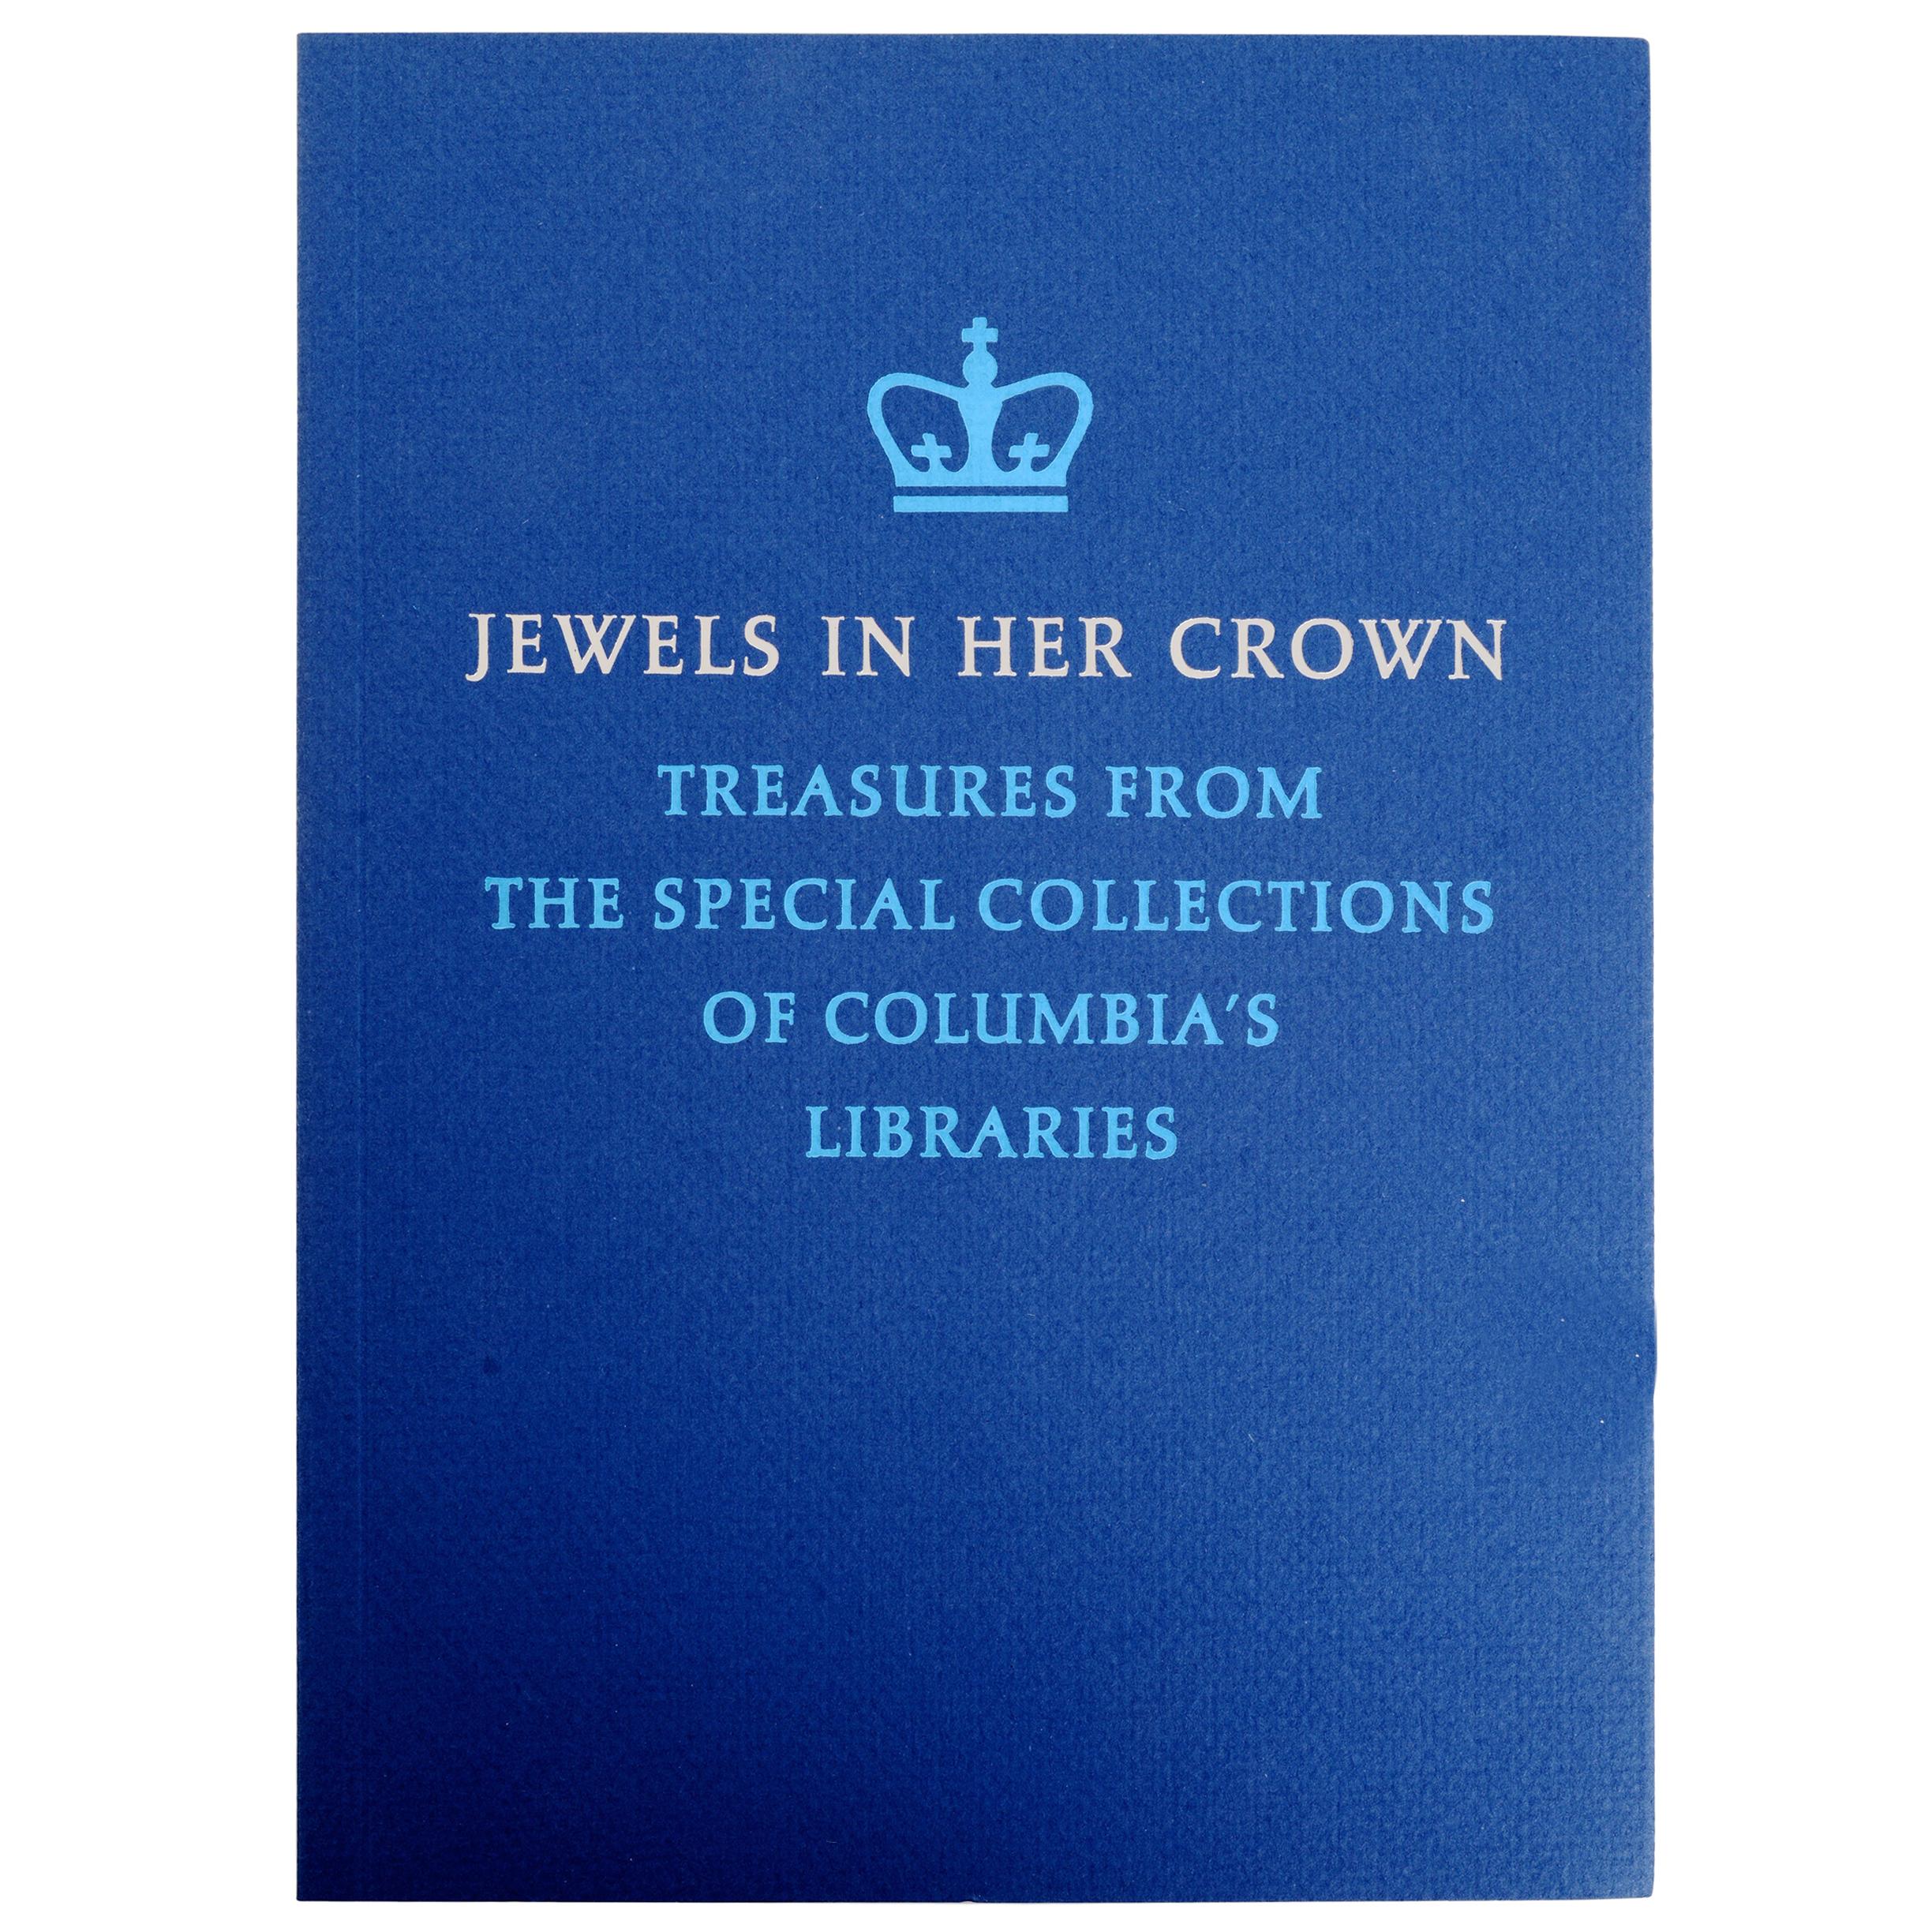 Jewels in Her Crown Treasures From Special Collections of Columbia's Libraries